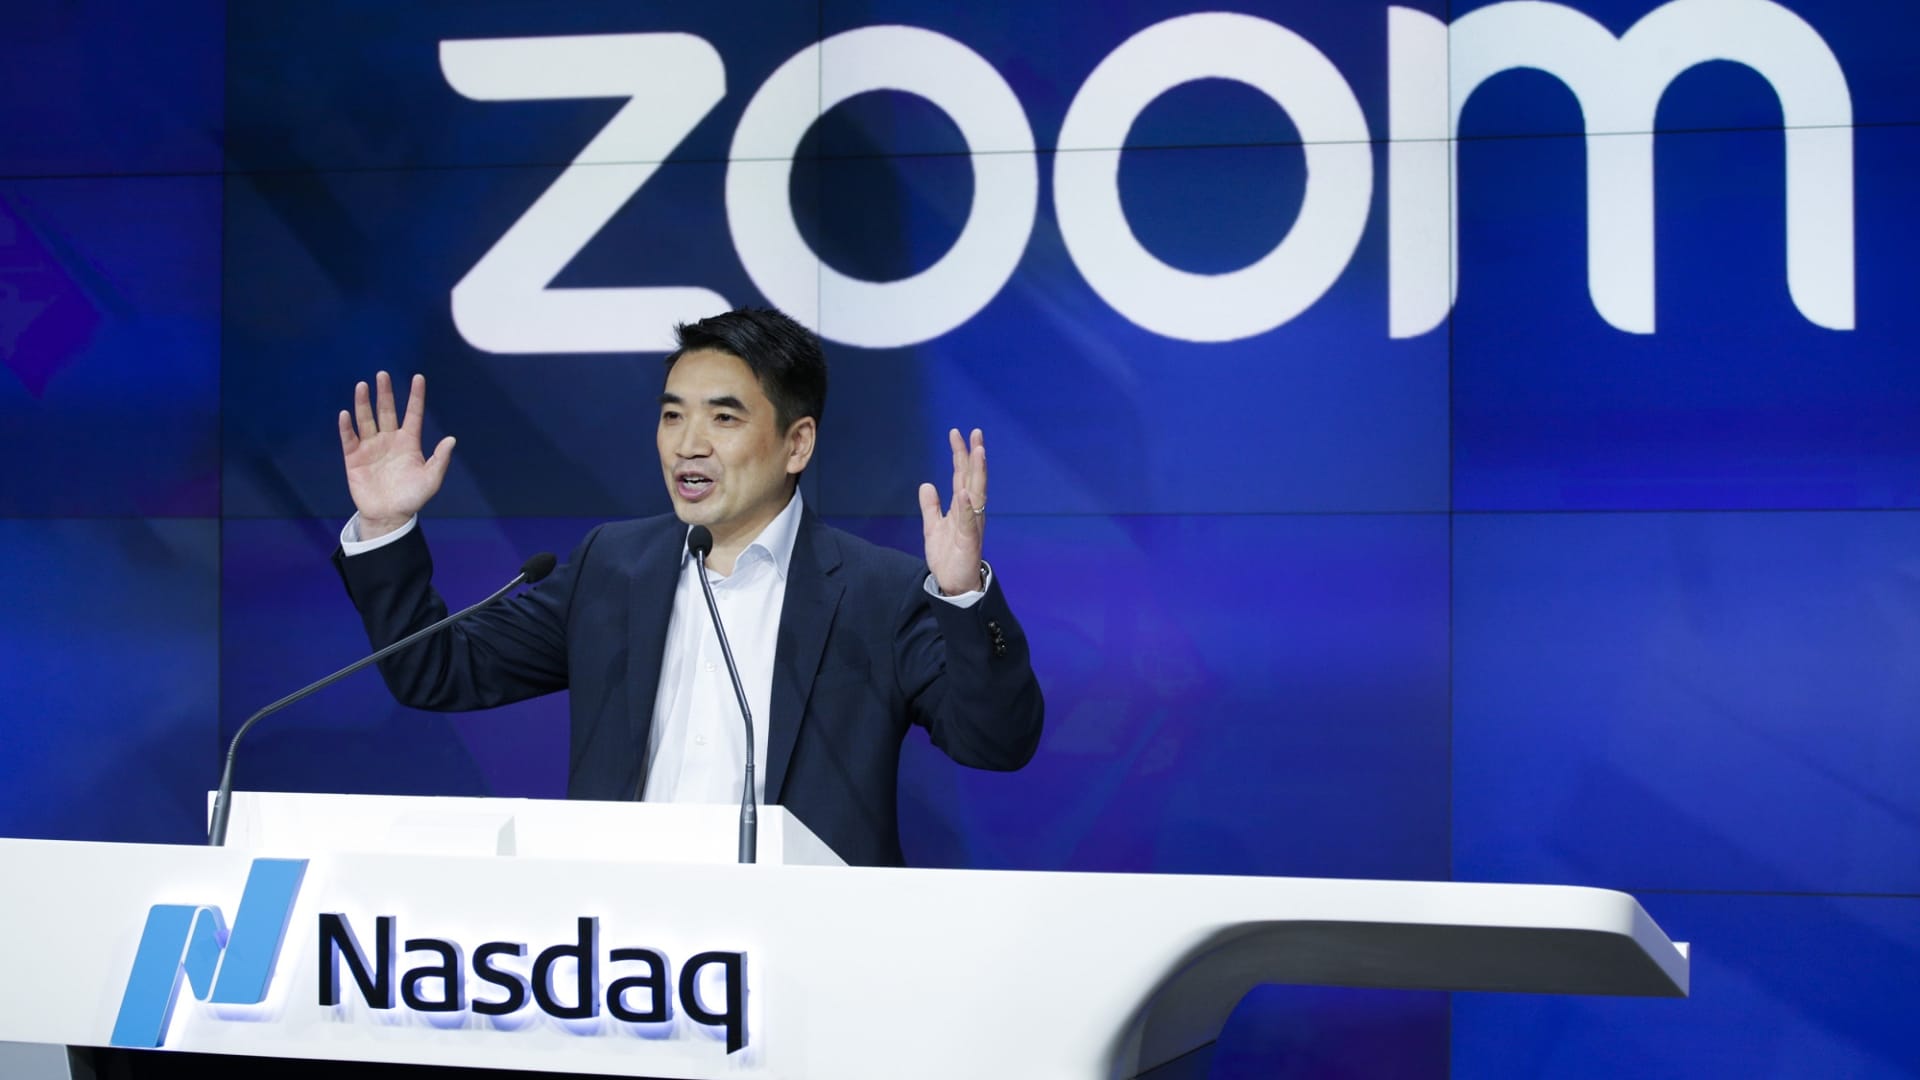 Zoom founder Eric Yuan speaks before the Nasdaq opening bell ceremony on April 18, 2019 in New York City.